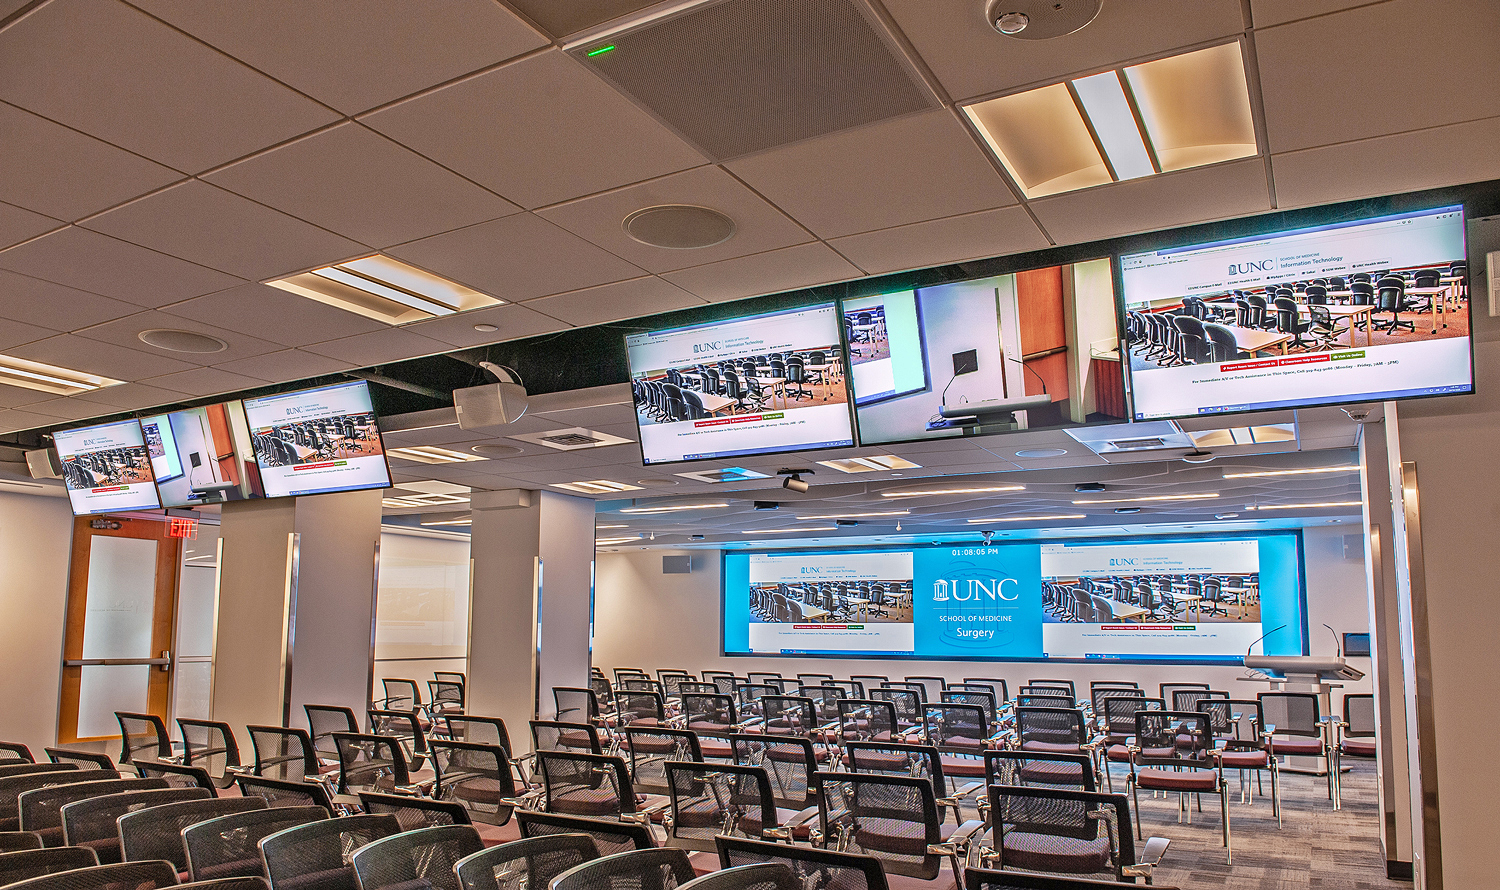 The University of North Carolina’s new 140-seat Surgical Education Center in the Burnett Womack Building on the Chapel Hill campus. Here, UNC surgeons connect and interact with their peers locally and around the world to share knowledge, train, and educate.